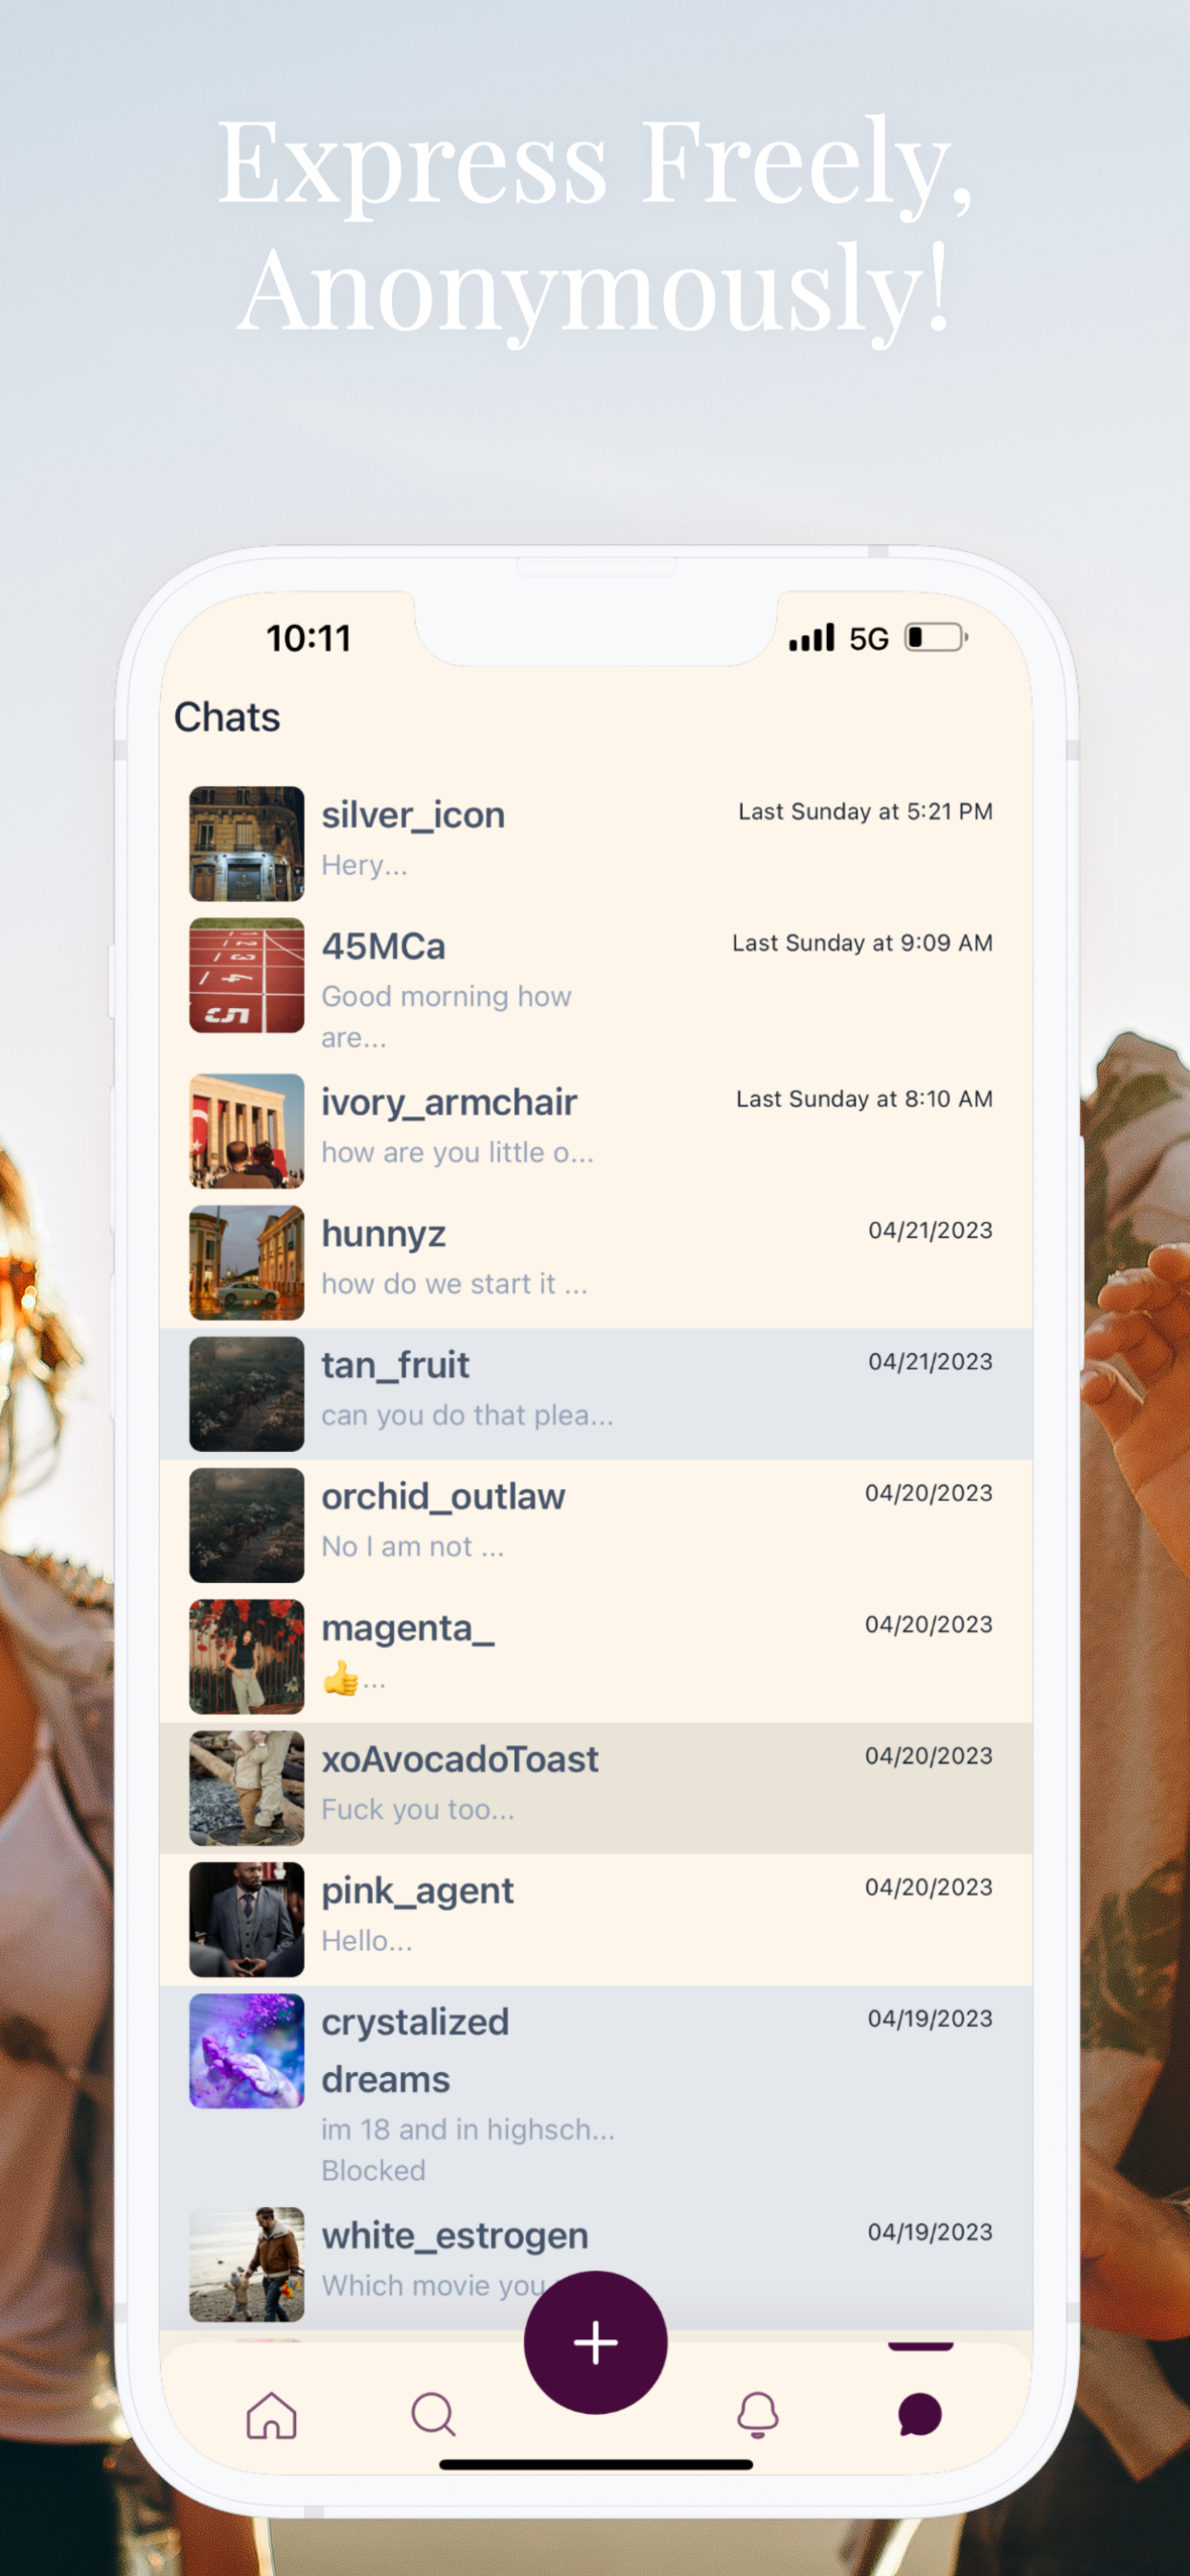 Hush - Express Freely, The Anonymous Social Networking App